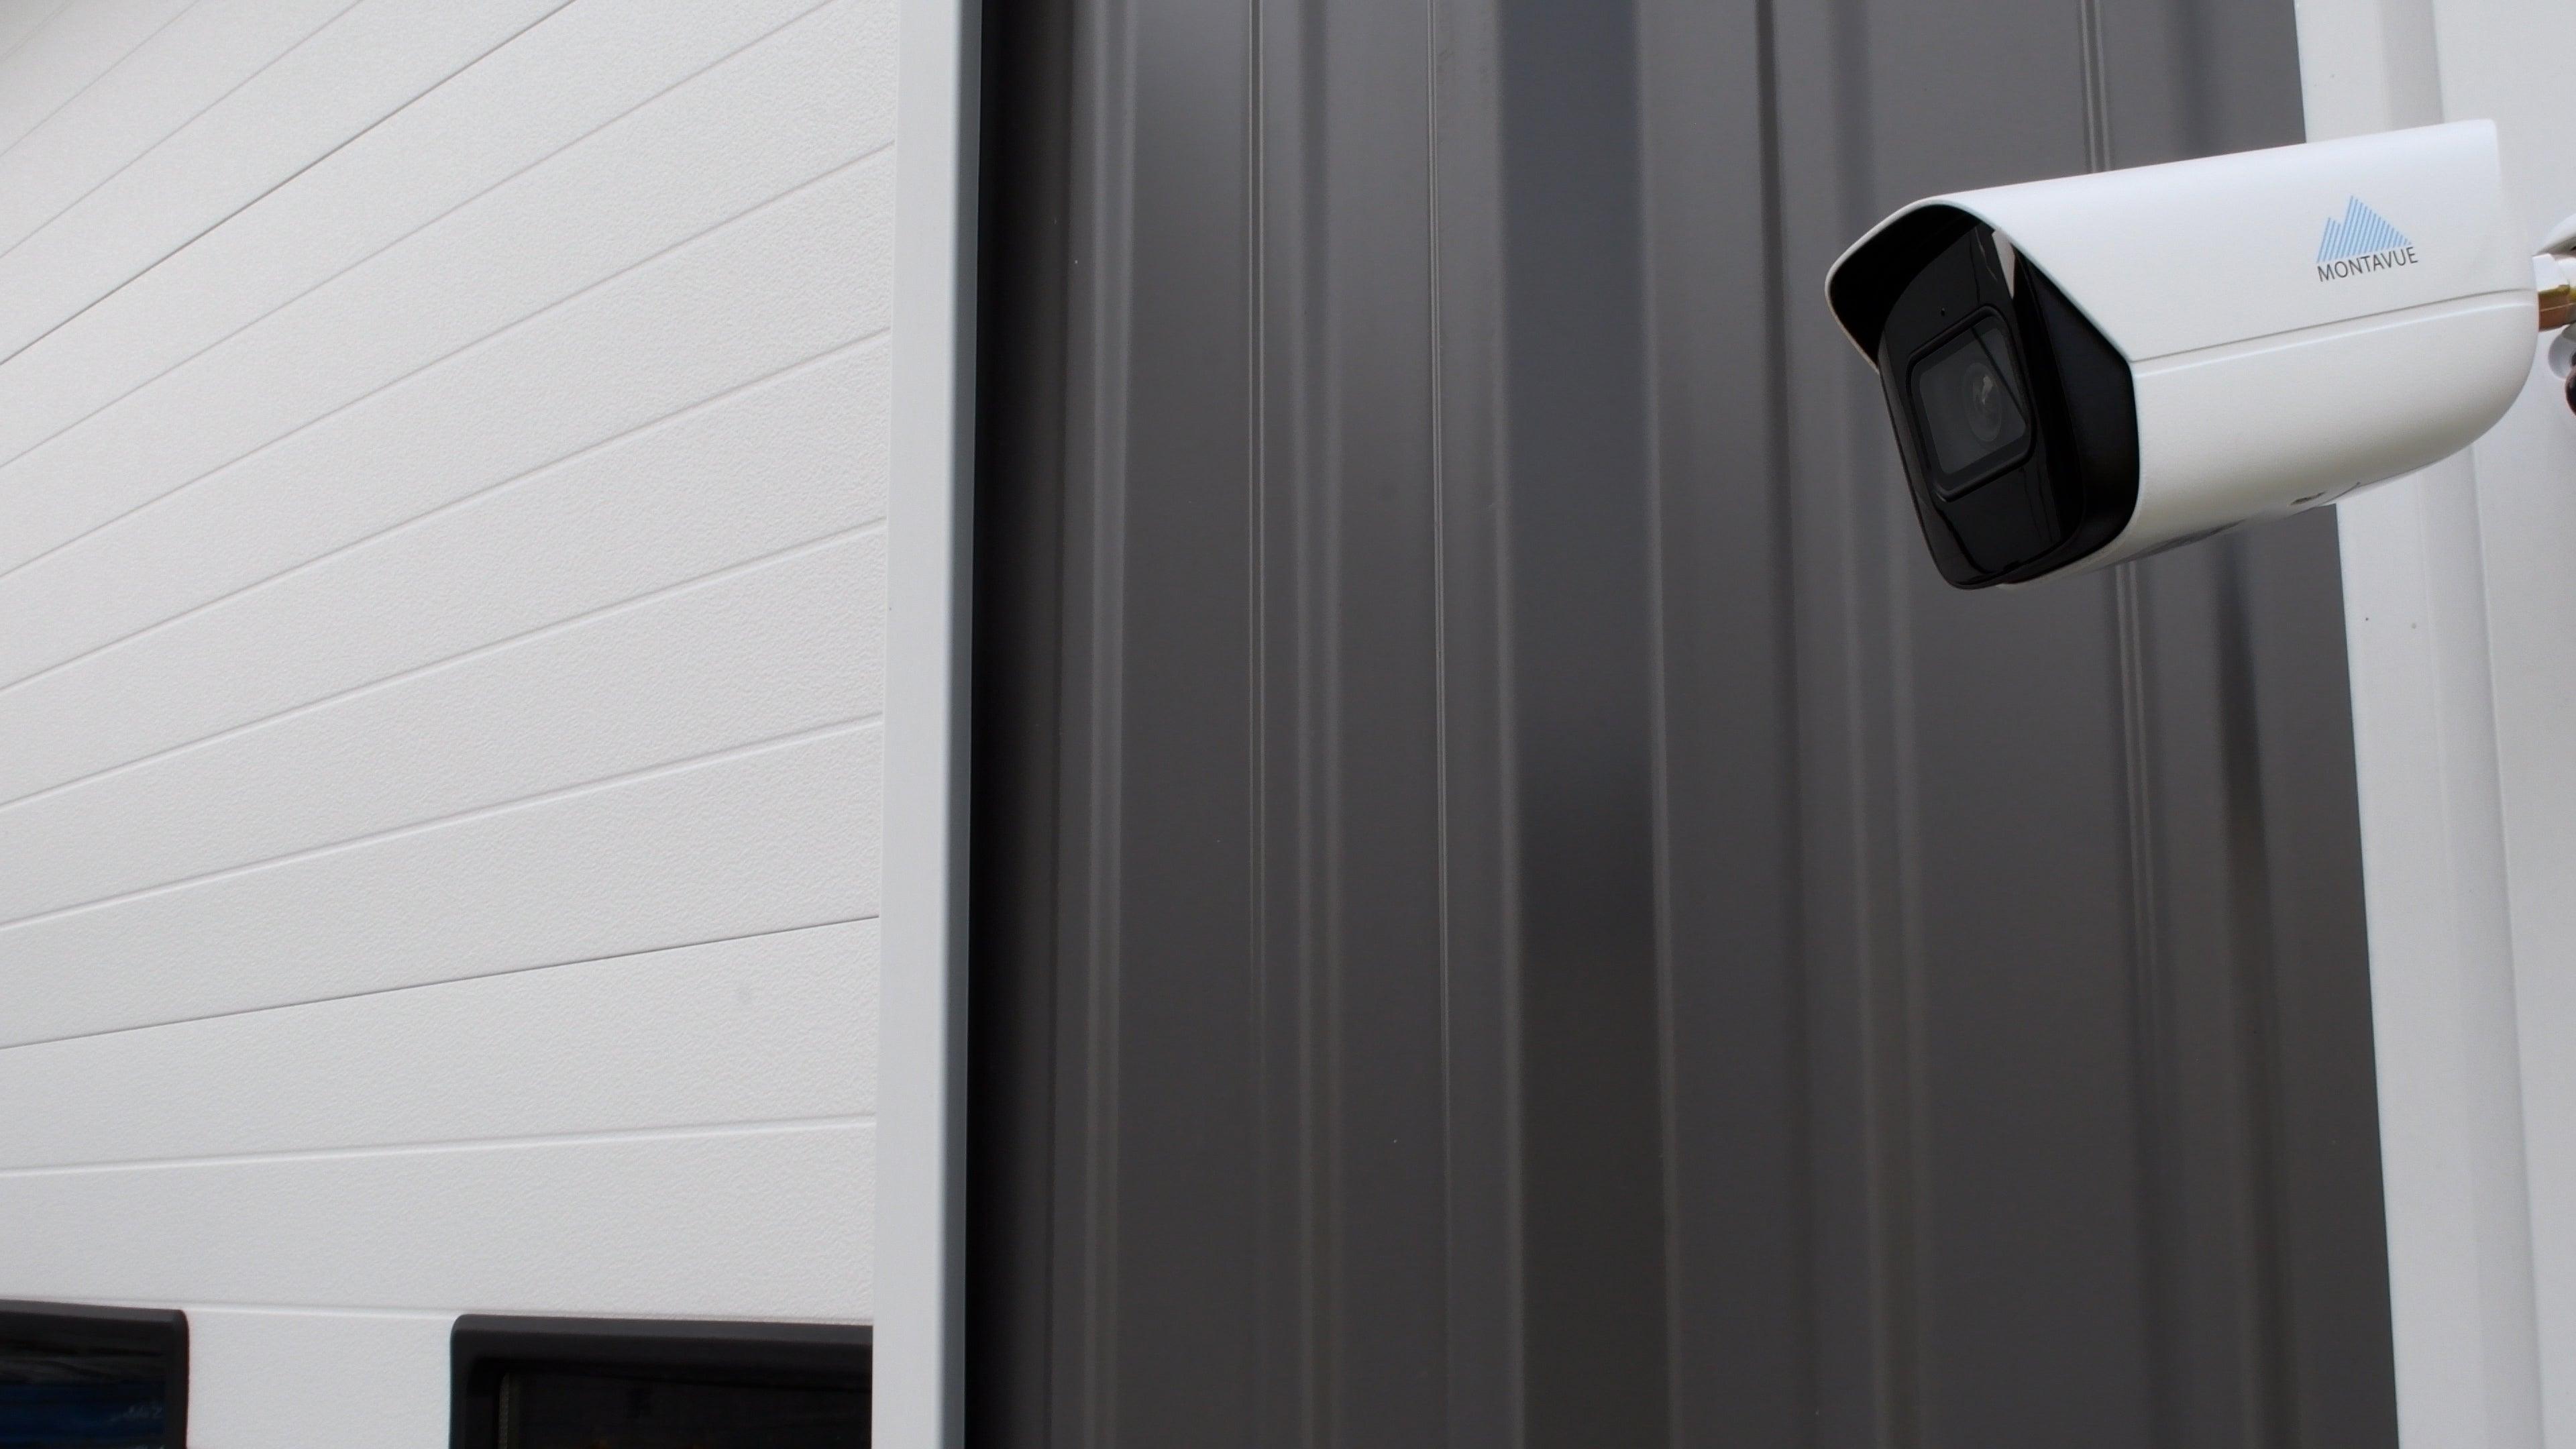 Can You Record Audio On Your Home Security Camera - Is It Legal? - Montavue